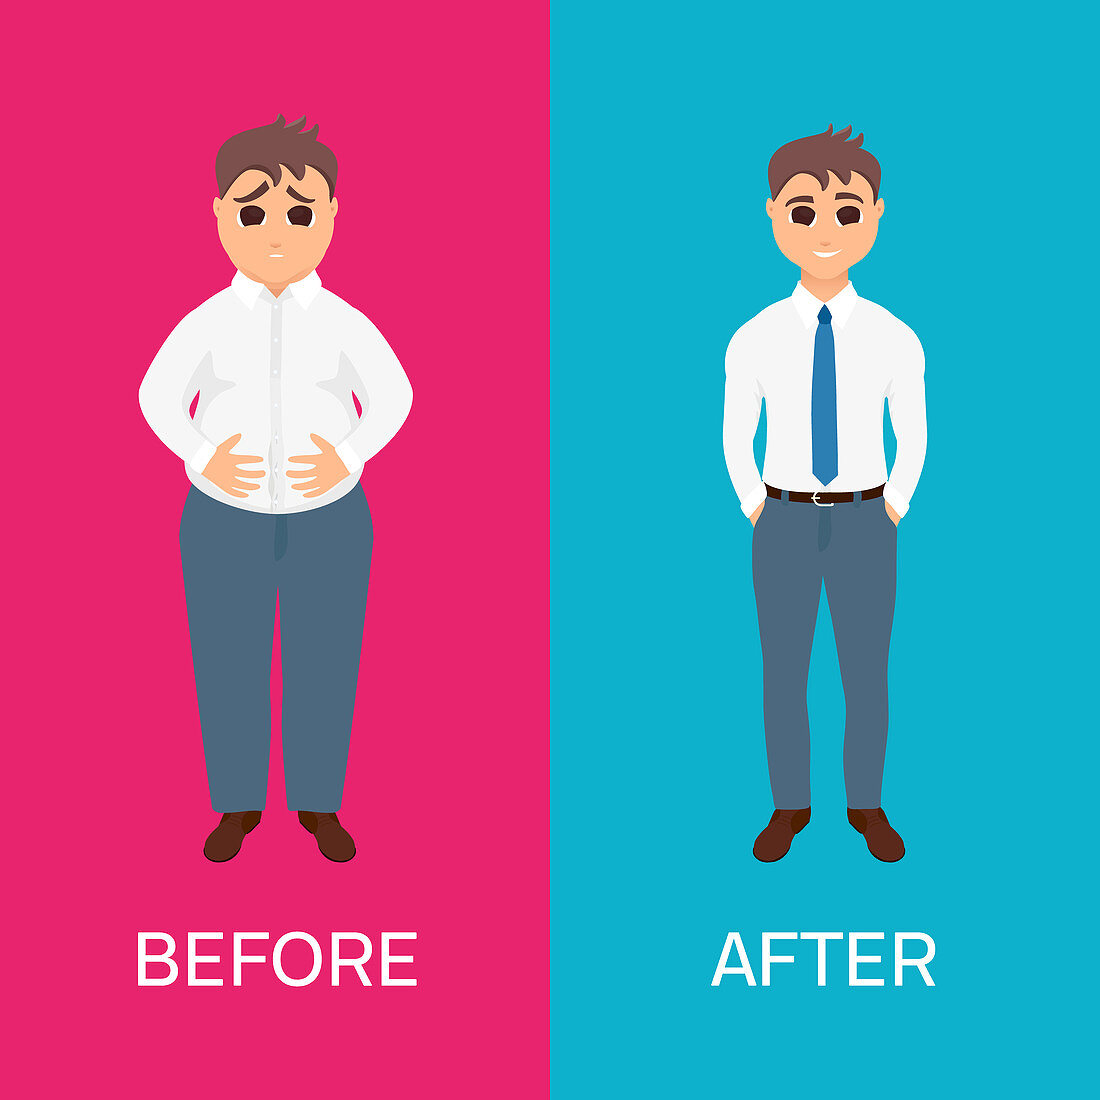 Man before and after weight loss, illustration